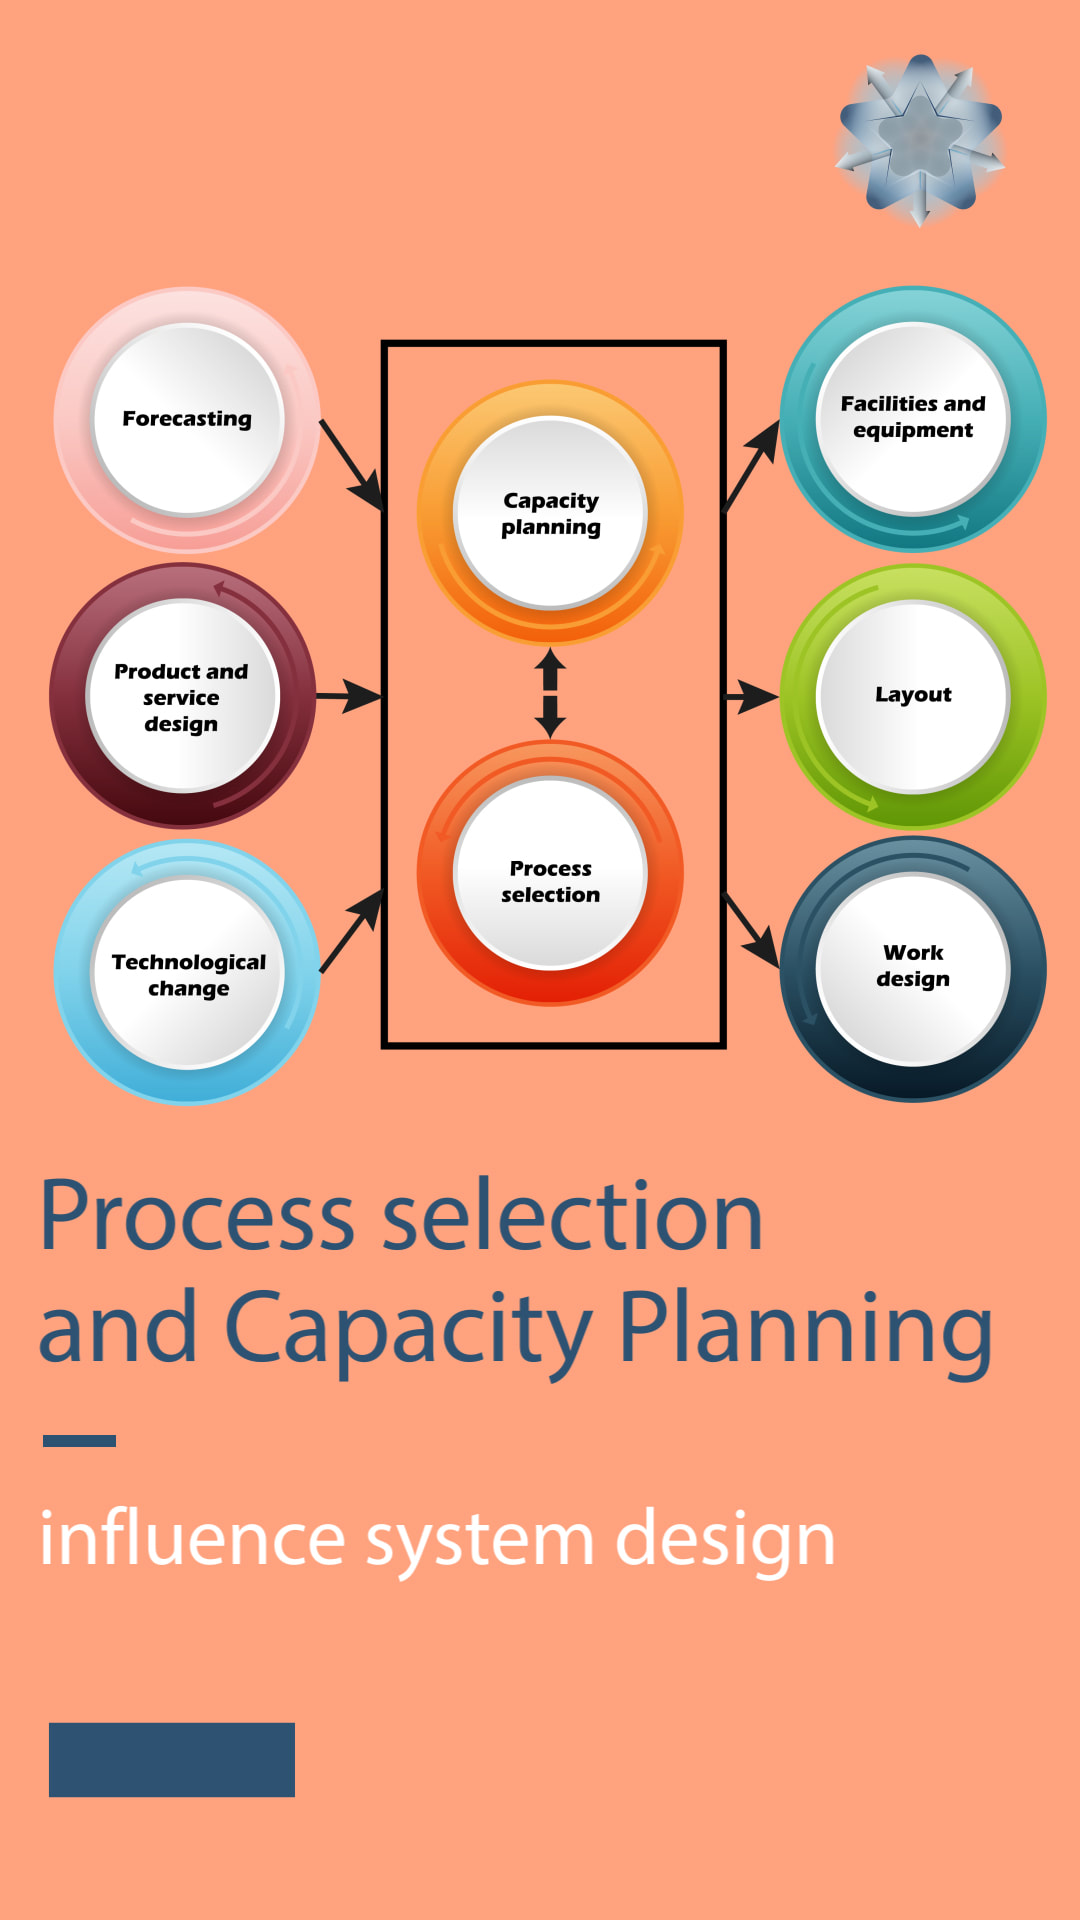 Process capacity planning and process selection